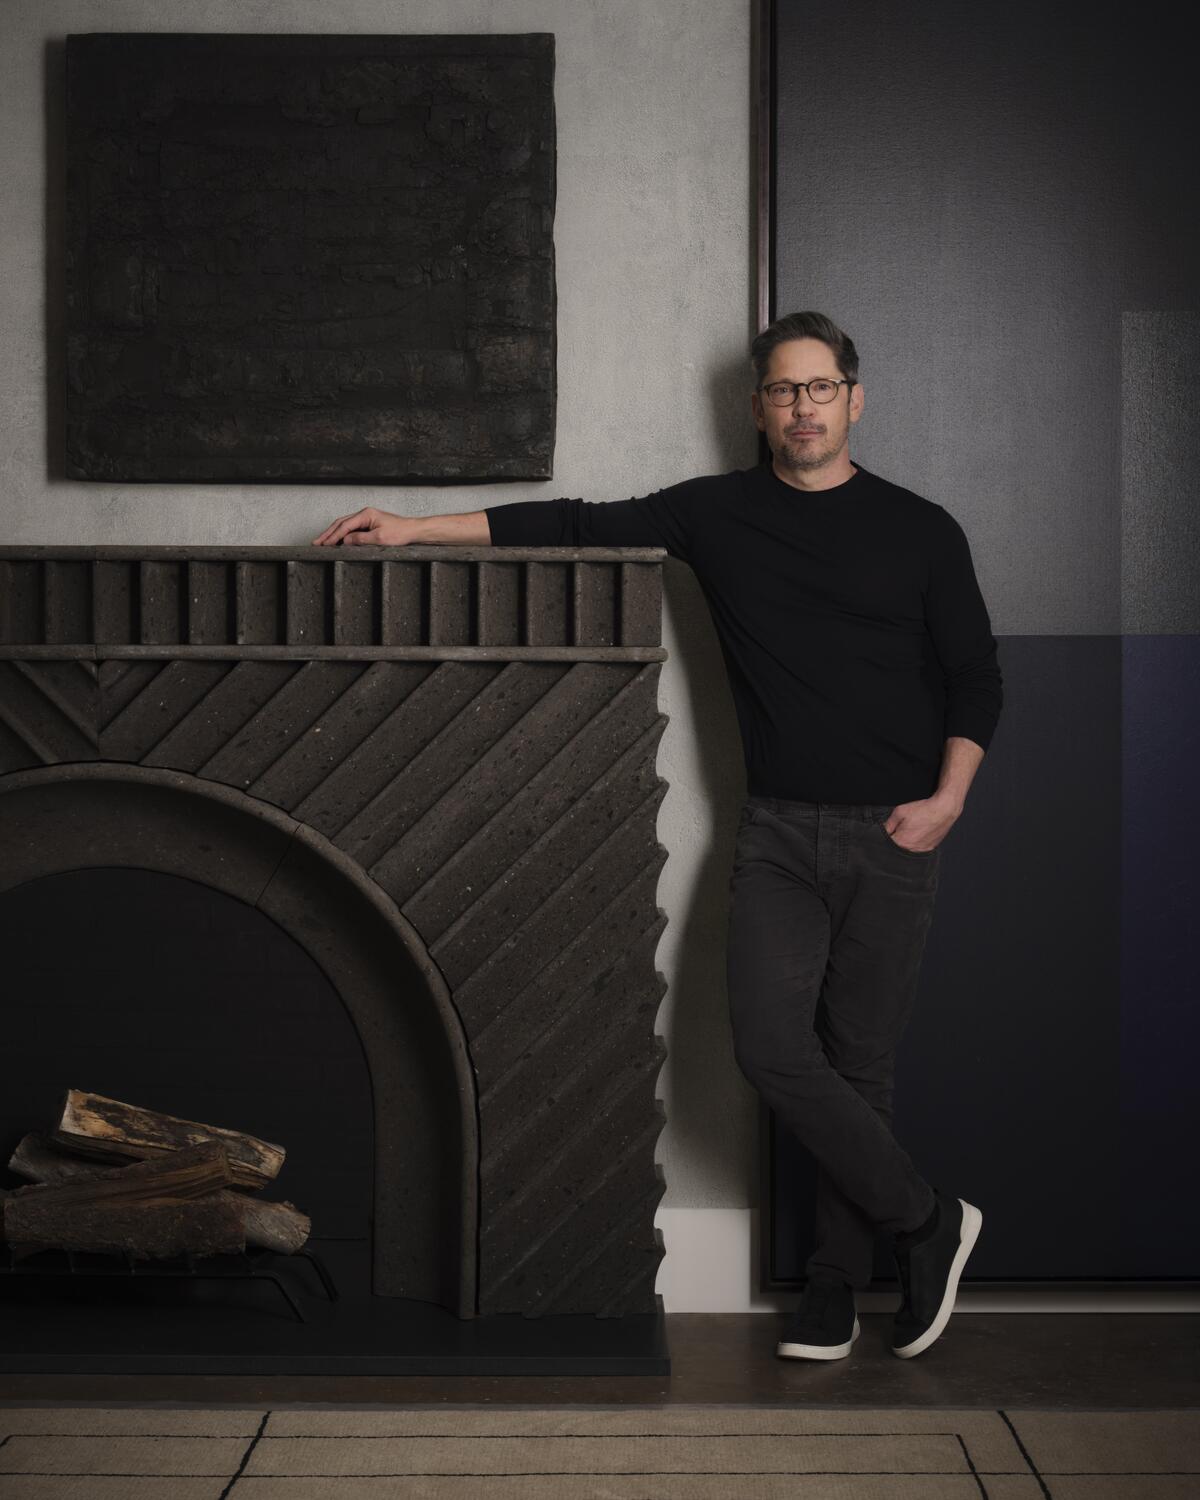 These 6 sculptural fireplace designs by Strike x Ann Sacks are undeniably hot